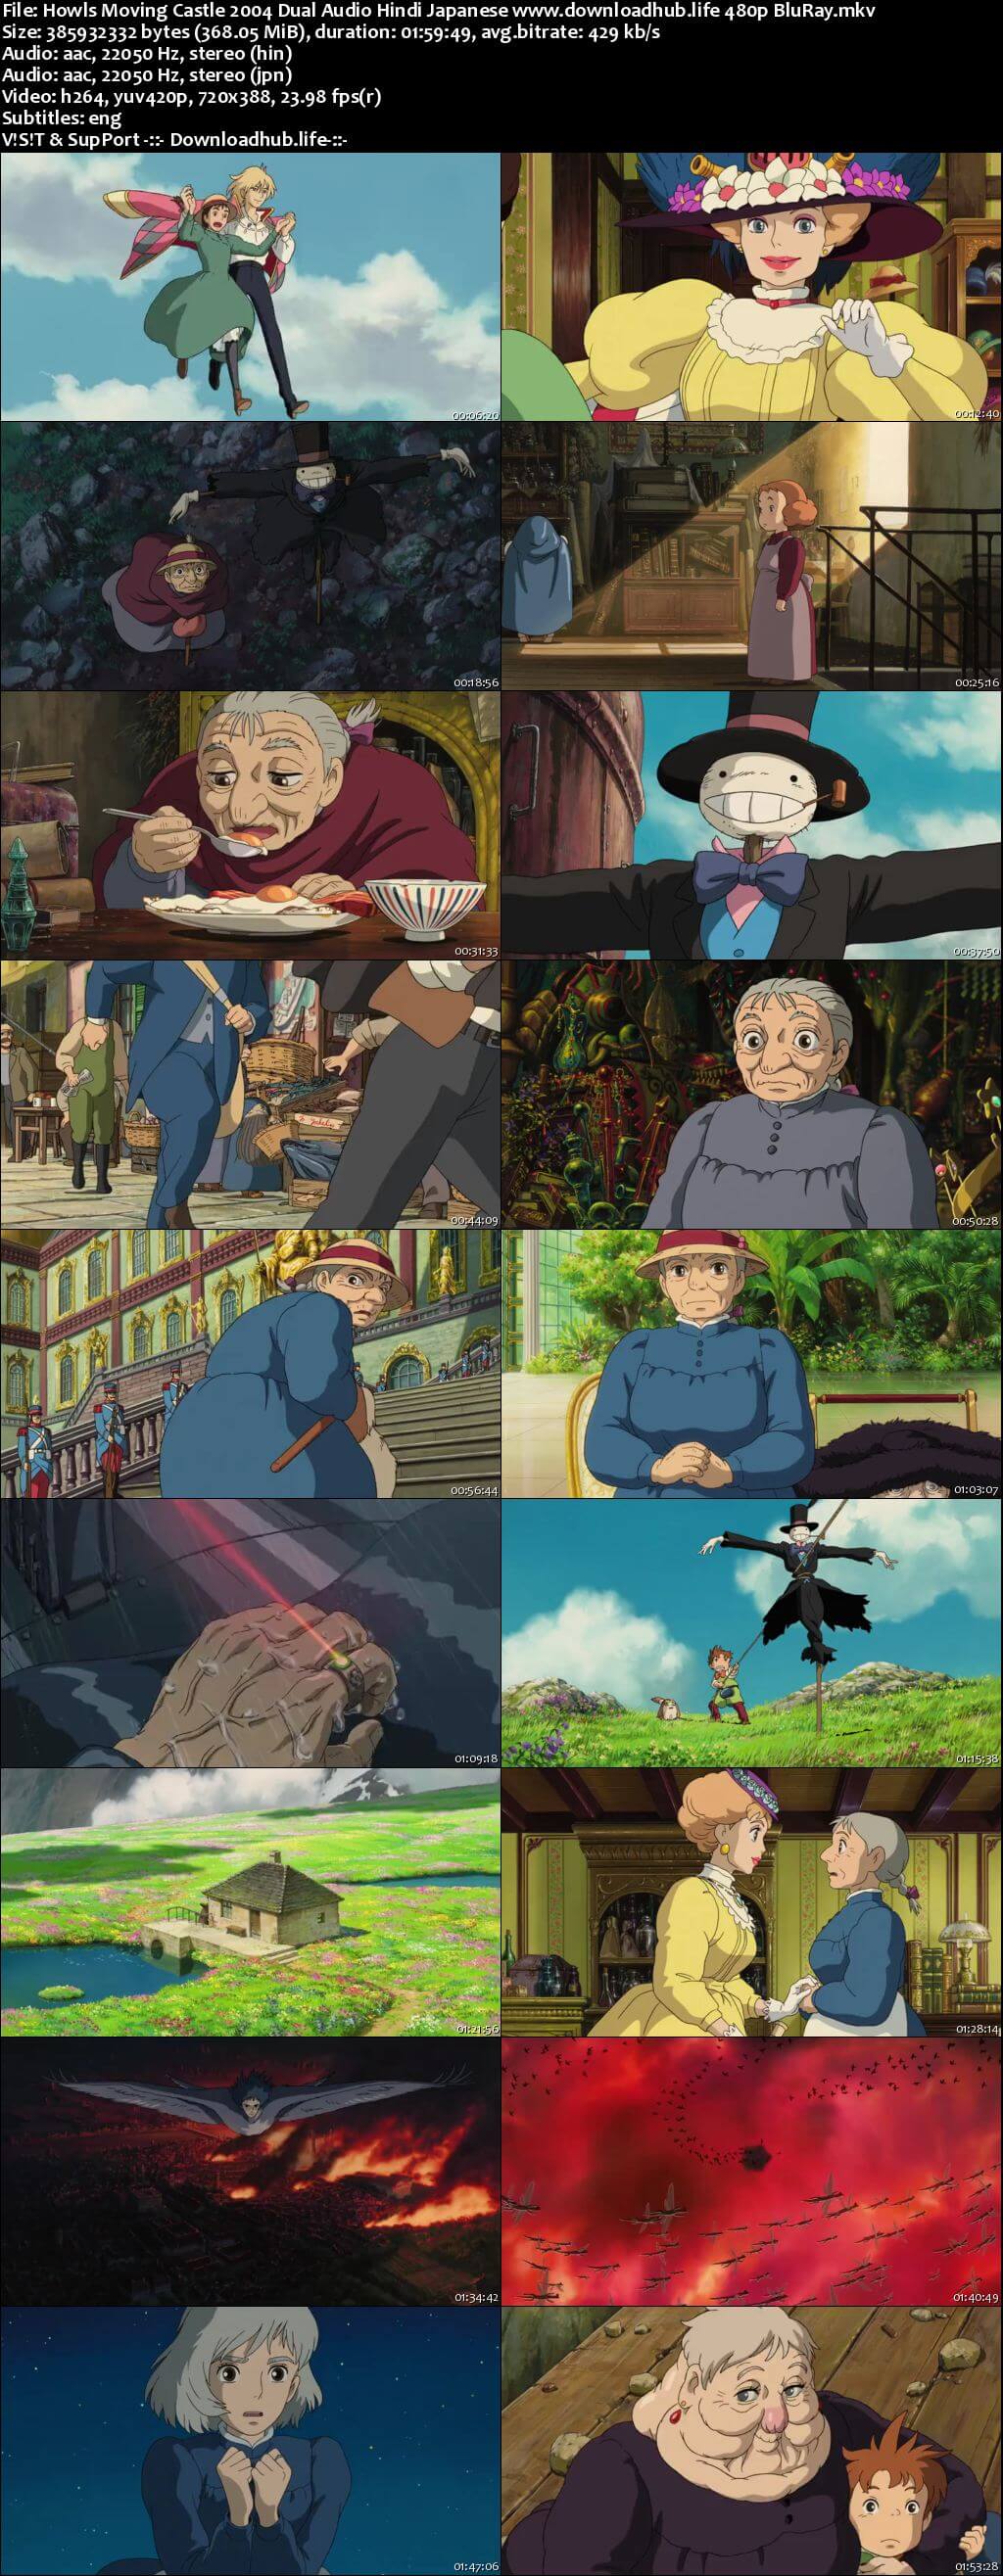 Howls Moving Castle 2004 Hindi Dual Audio 350MB BluRay 480p ESubs